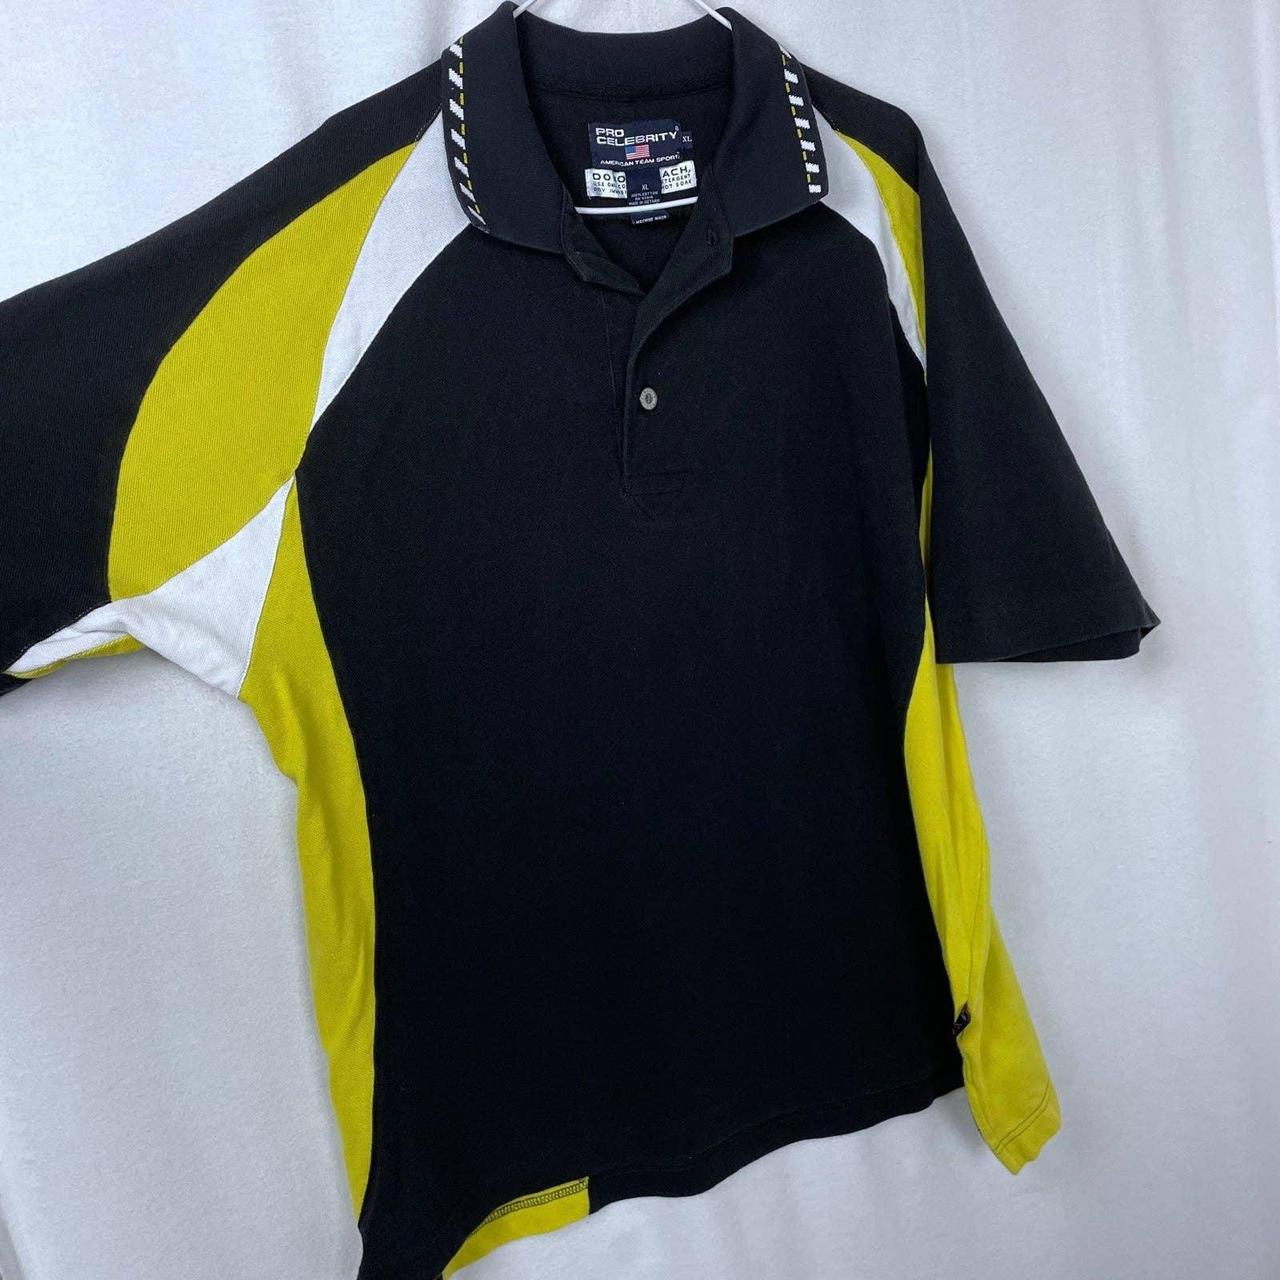 Men's Black and Yellow Polo-shirts | Depop